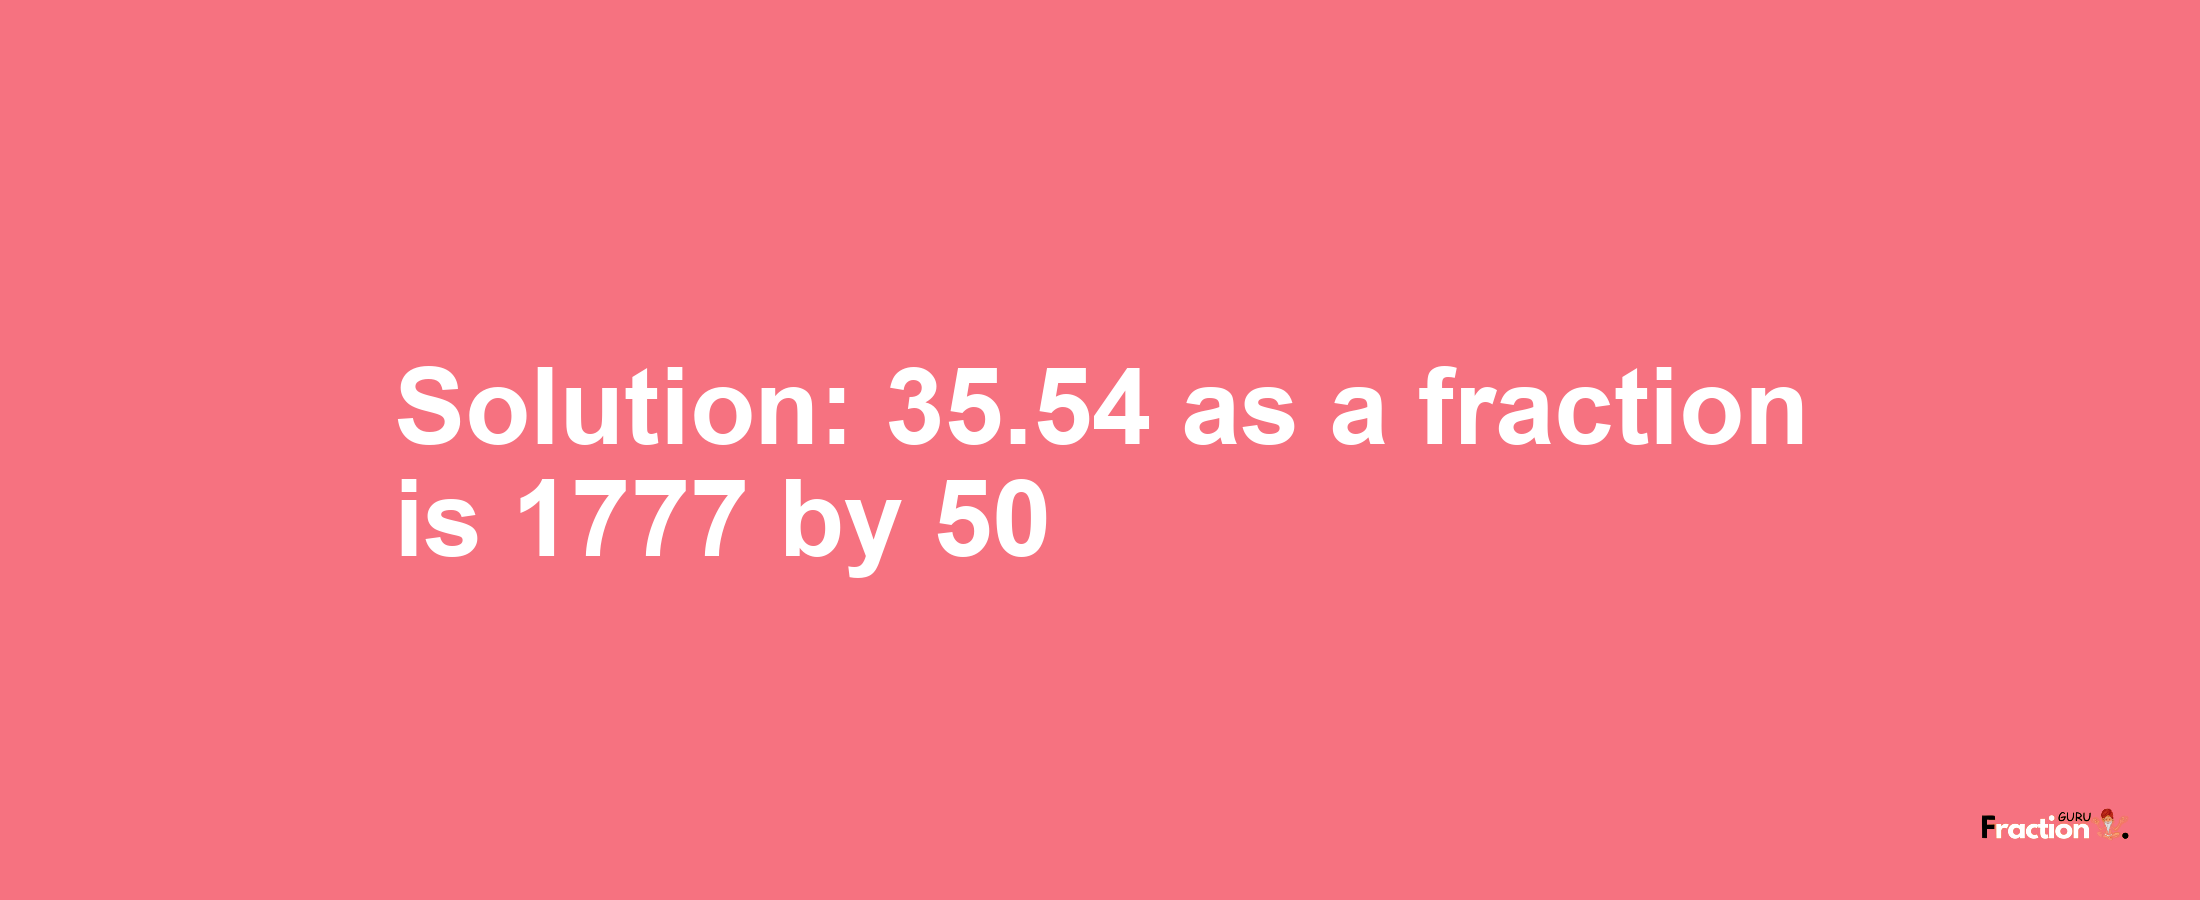 Solution:35.54 as a fraction is 1777/50